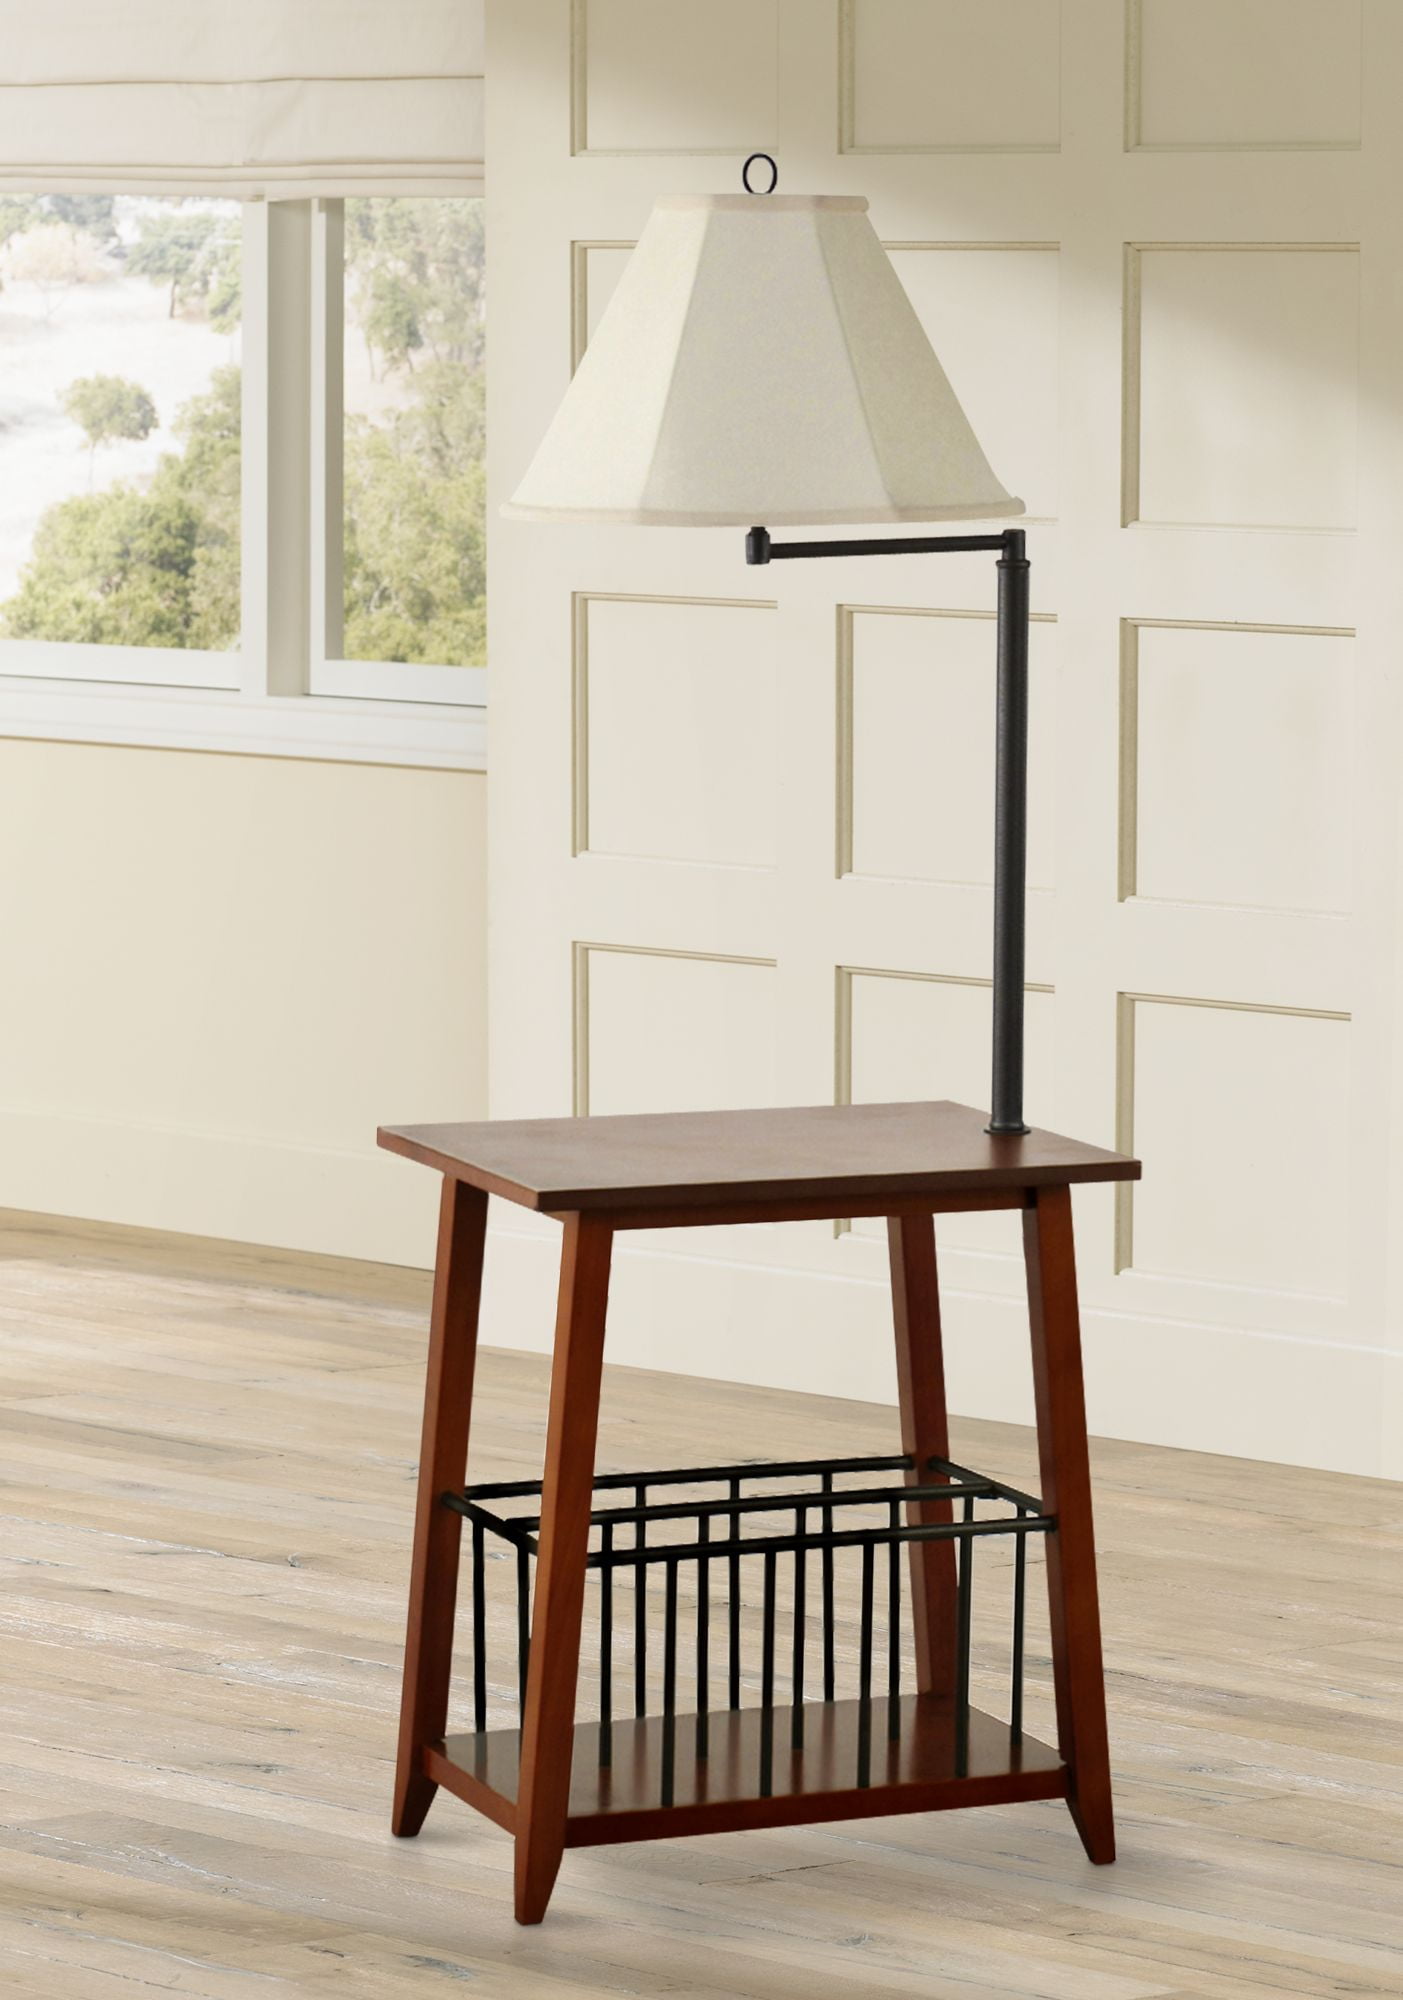 Integrated Wooden Side Table and Metal Magazine Rack with LED Bulb Floor Lamp 